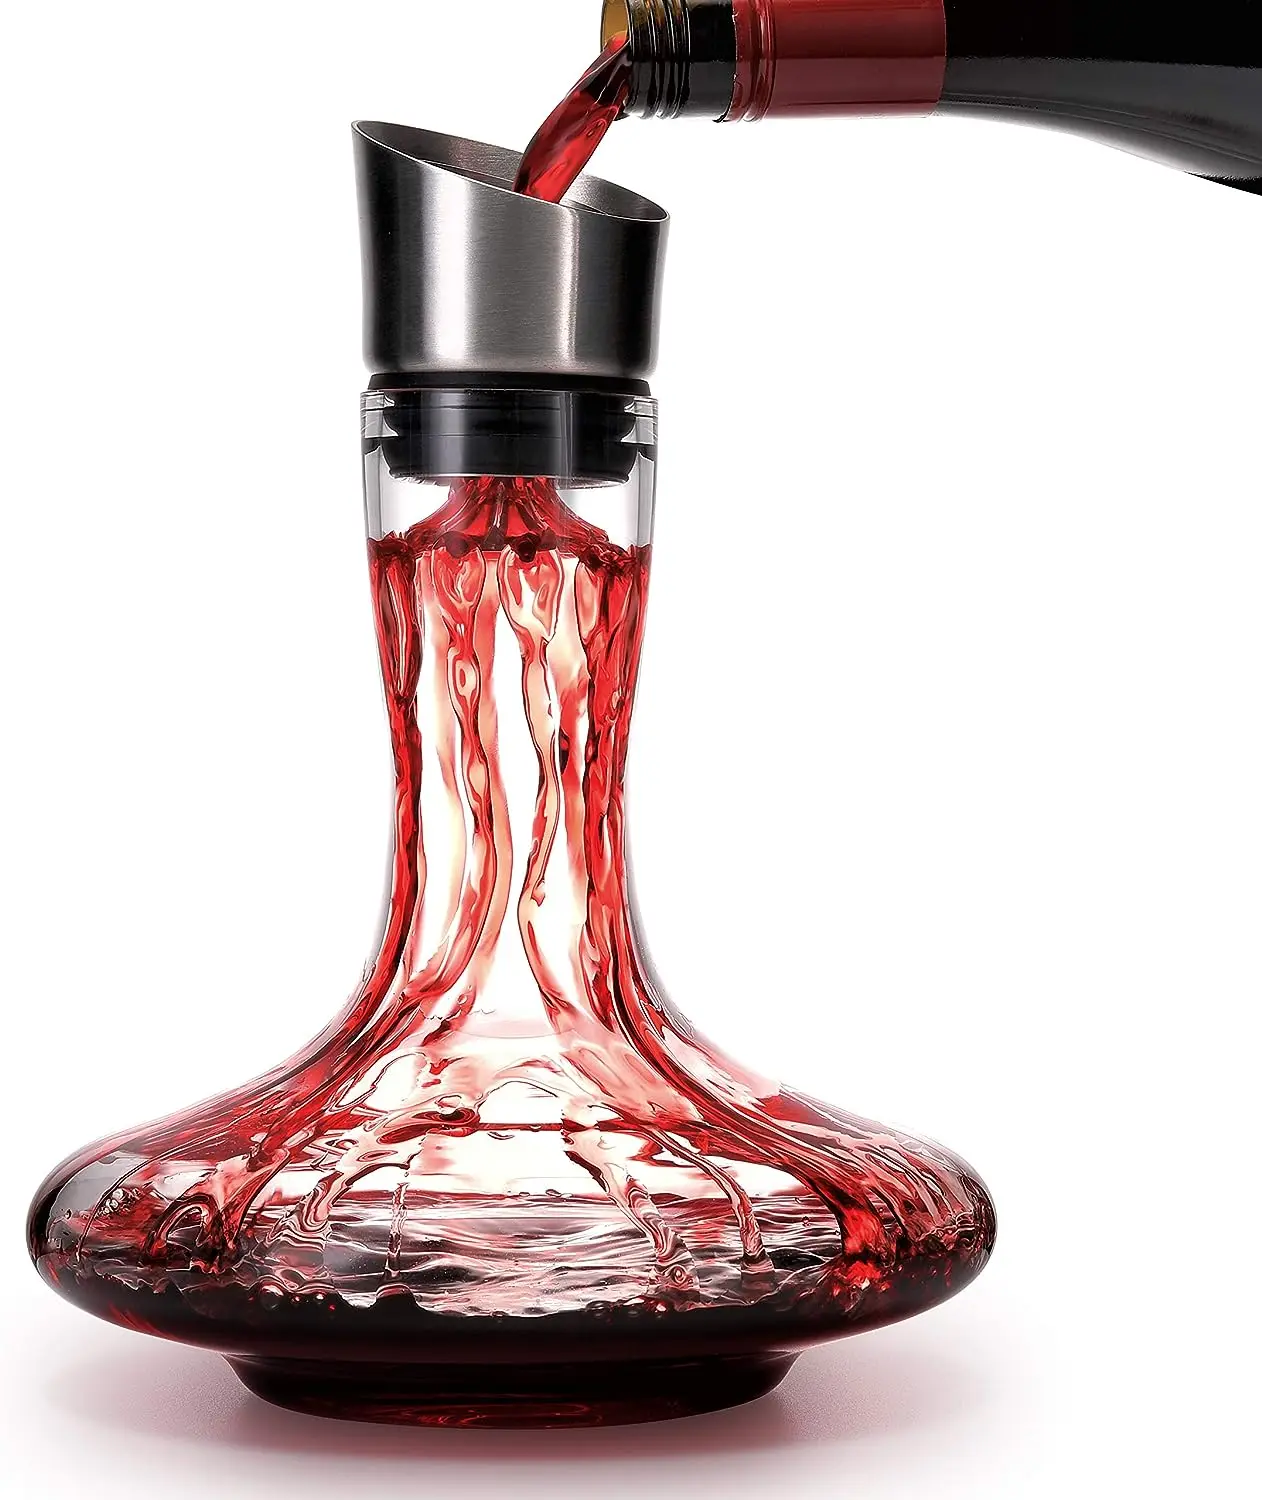 

Decanter Built-in Aerator Pourer, Wine Carafe Red Wine Decanter,100% Lead-free Crystal Glass, Wine Hand-held Aerator, Wine Gift,